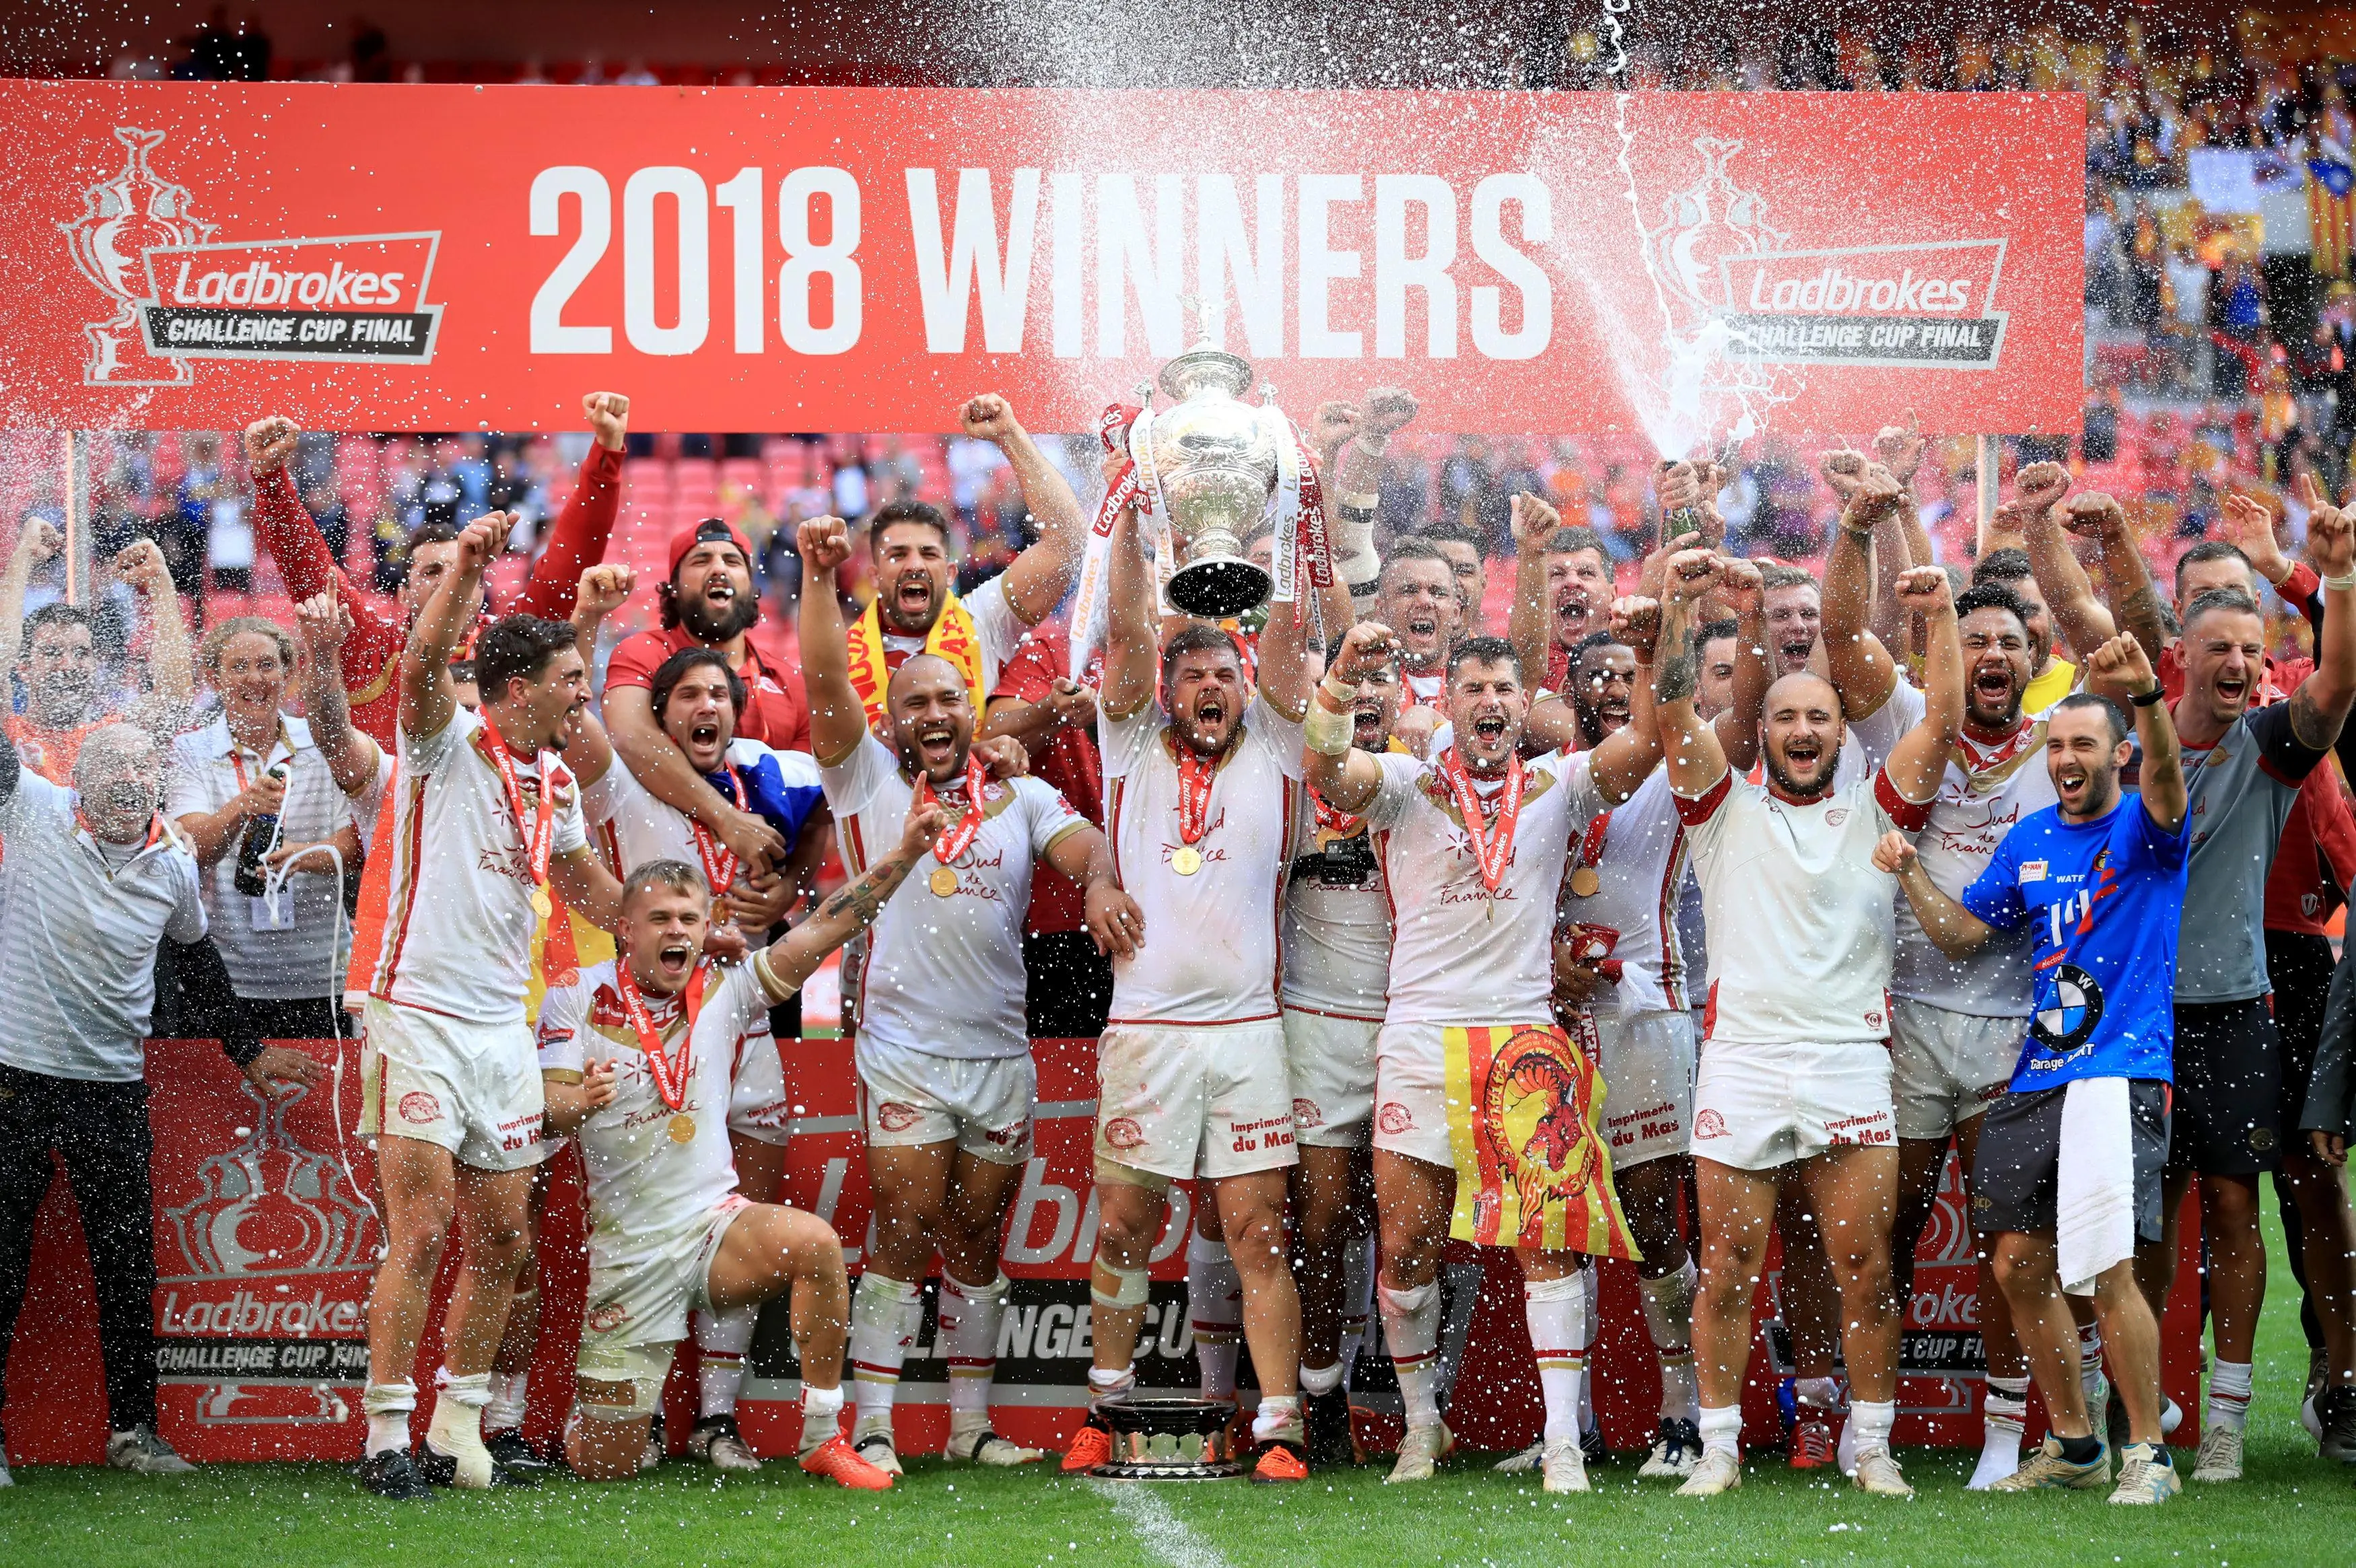 15-facts-about-catalans-dragons